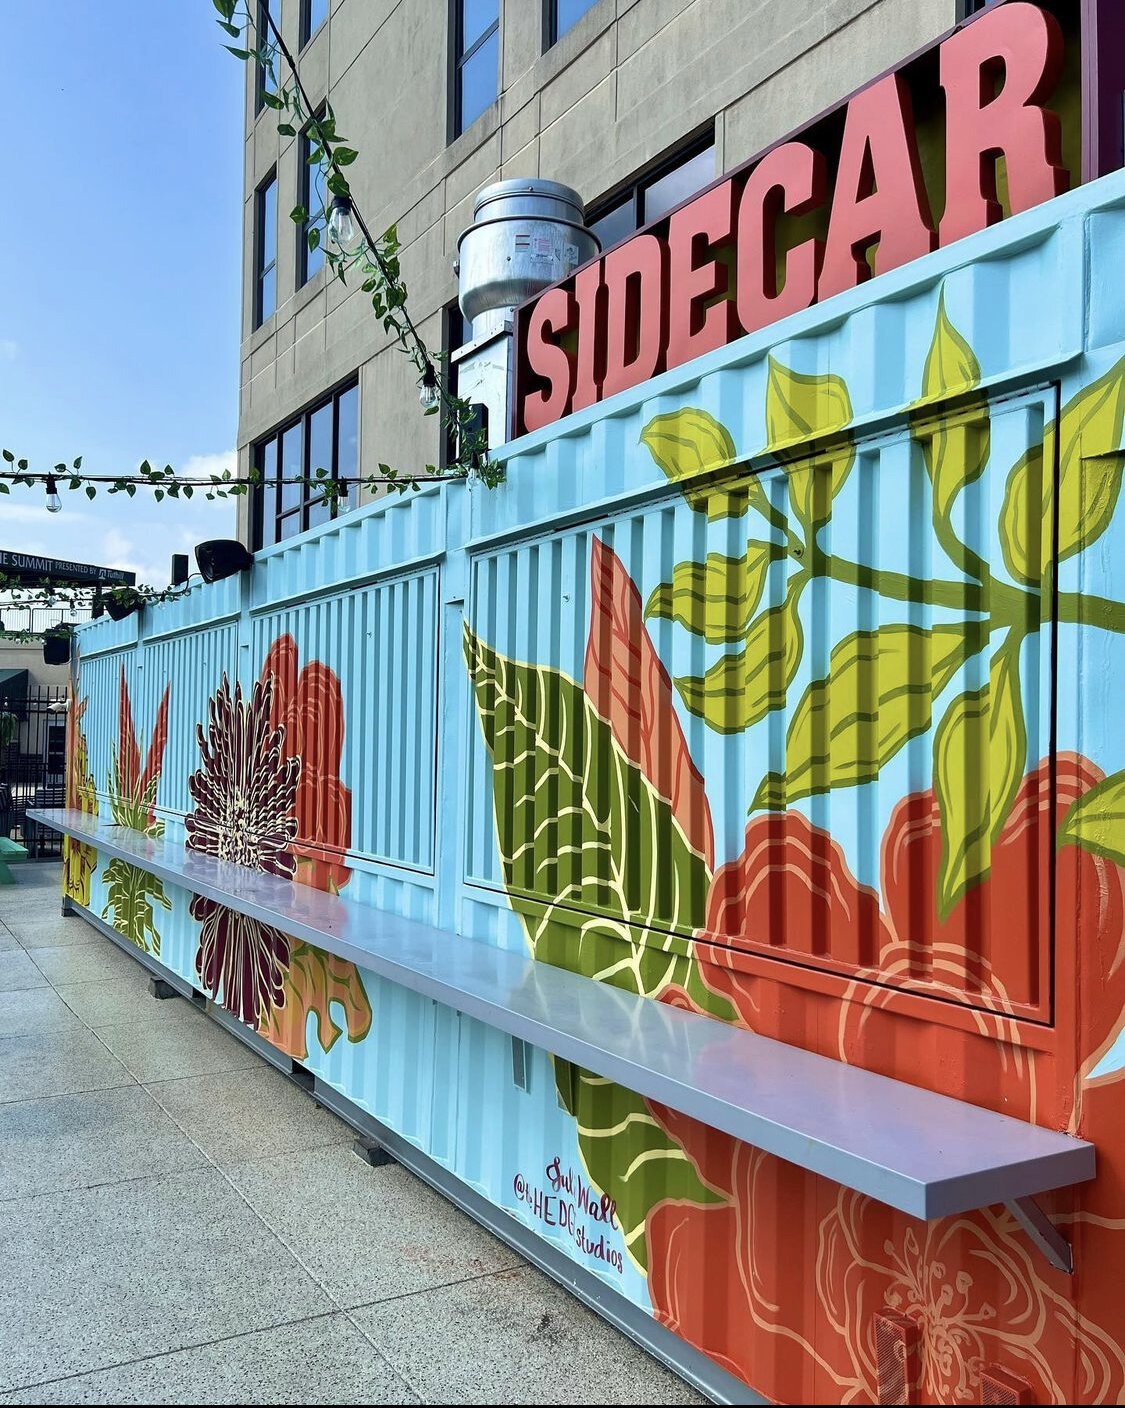 Local artist Julie Wall of The Hedge Studios has completed an Art This Way mural installation at the Sidecar.